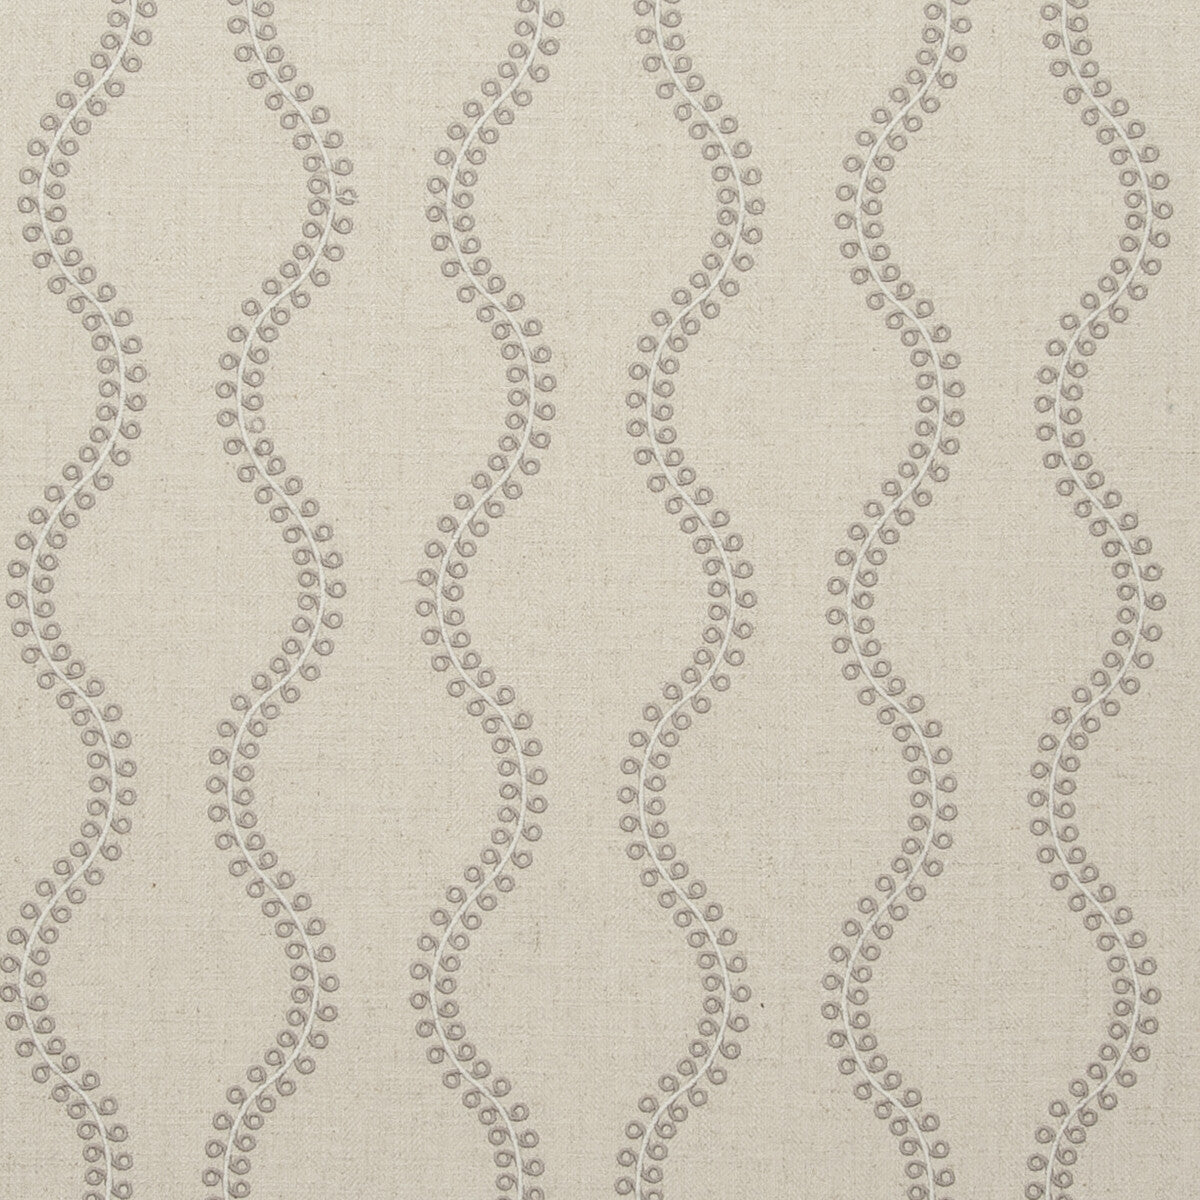 Woburn fabric in taupe color - pattern F0741/05.CAC.0 - by Clarke And Clarke in the Clarke &amp; Clarke Manor House collection